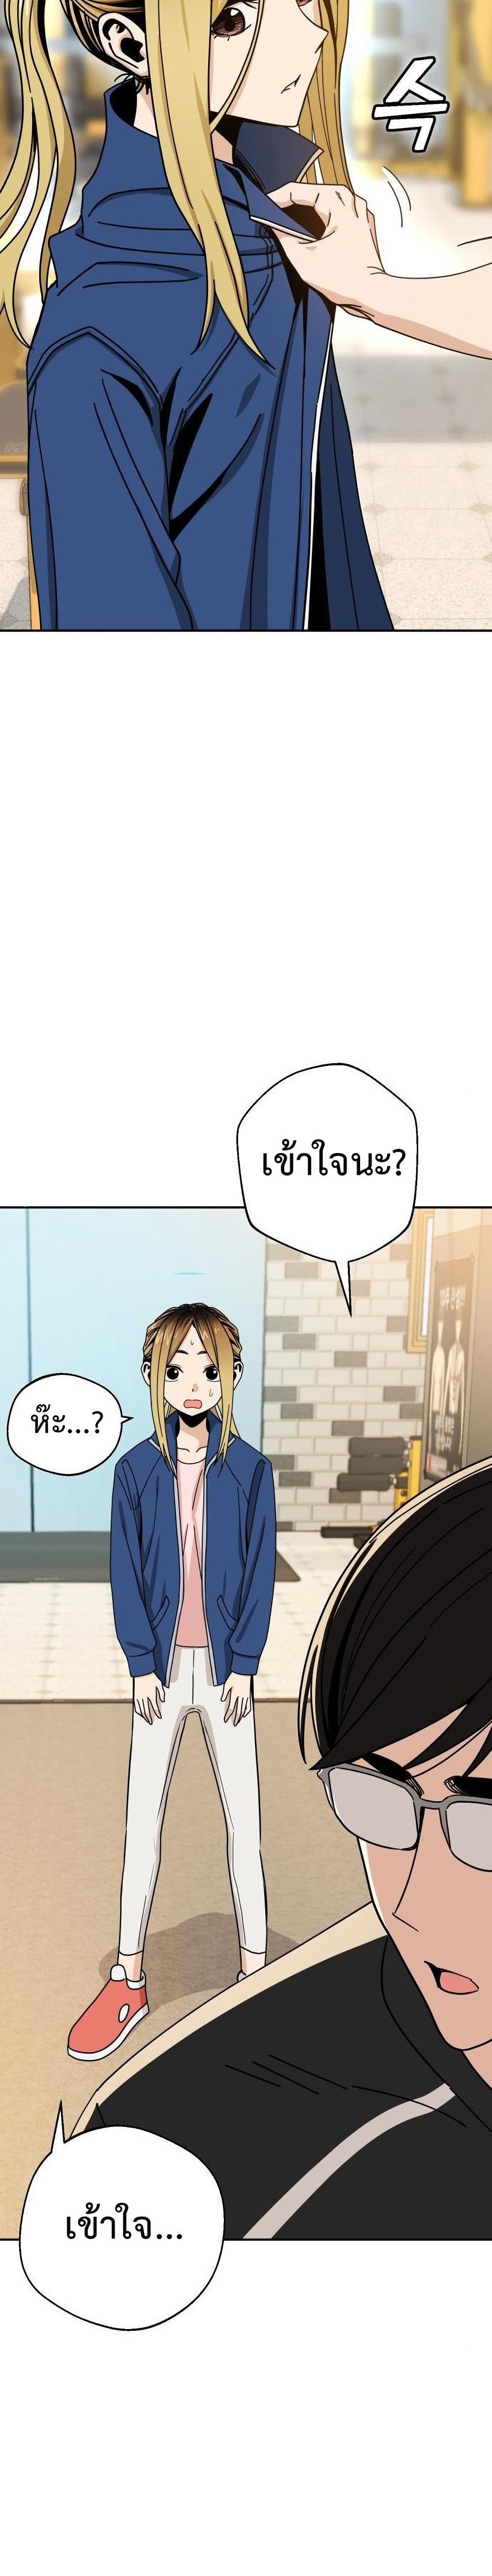 Match Made in Heaven by chance ตอนที่ 28 18